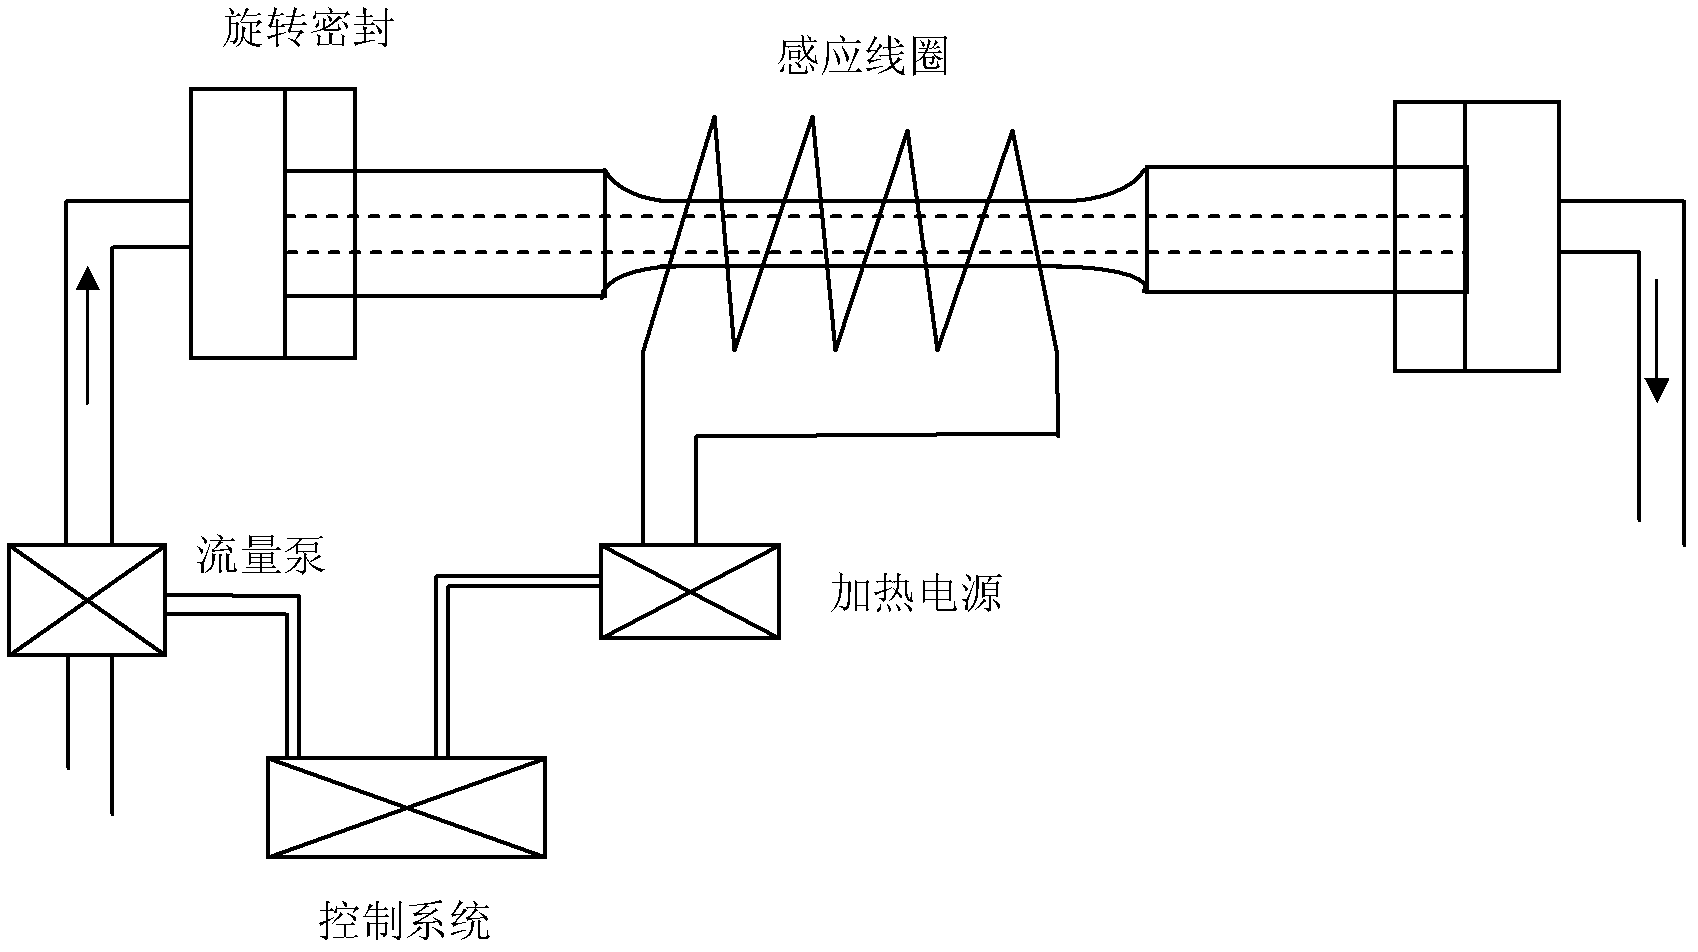 Thermal-force coupling fatigue test device and method